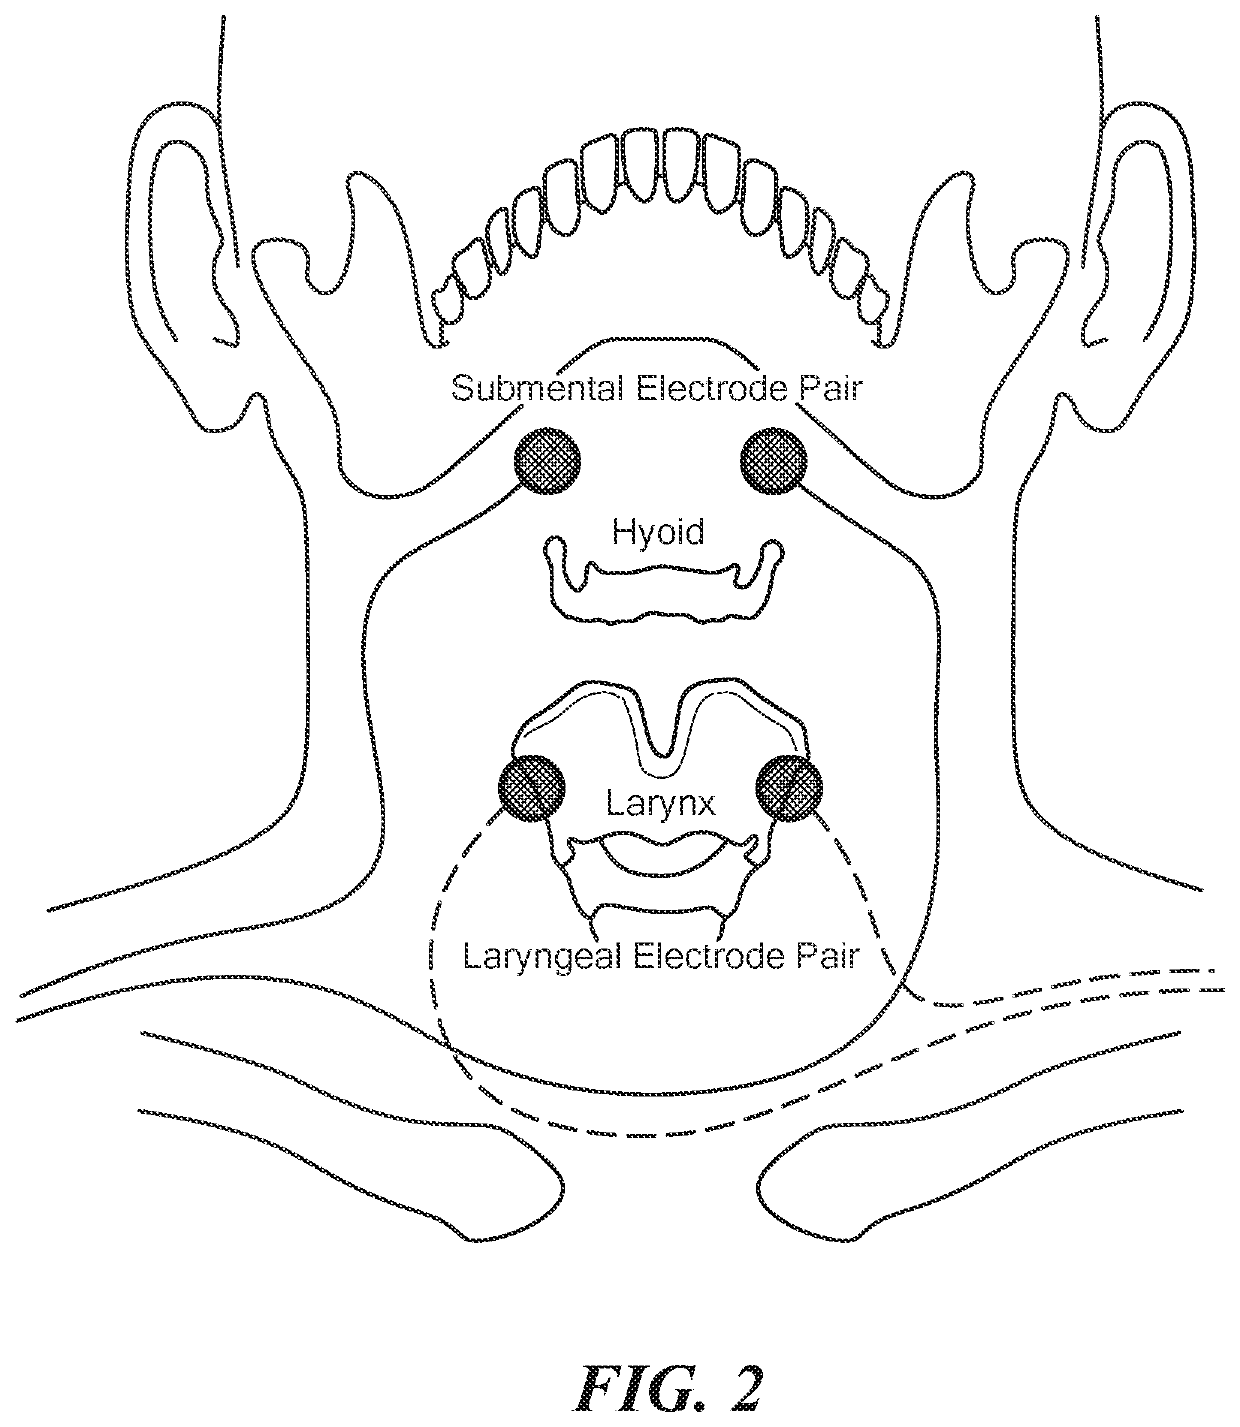 Eliciting Swallowing using Electrical Stimulation Applied via Surface Electrodes